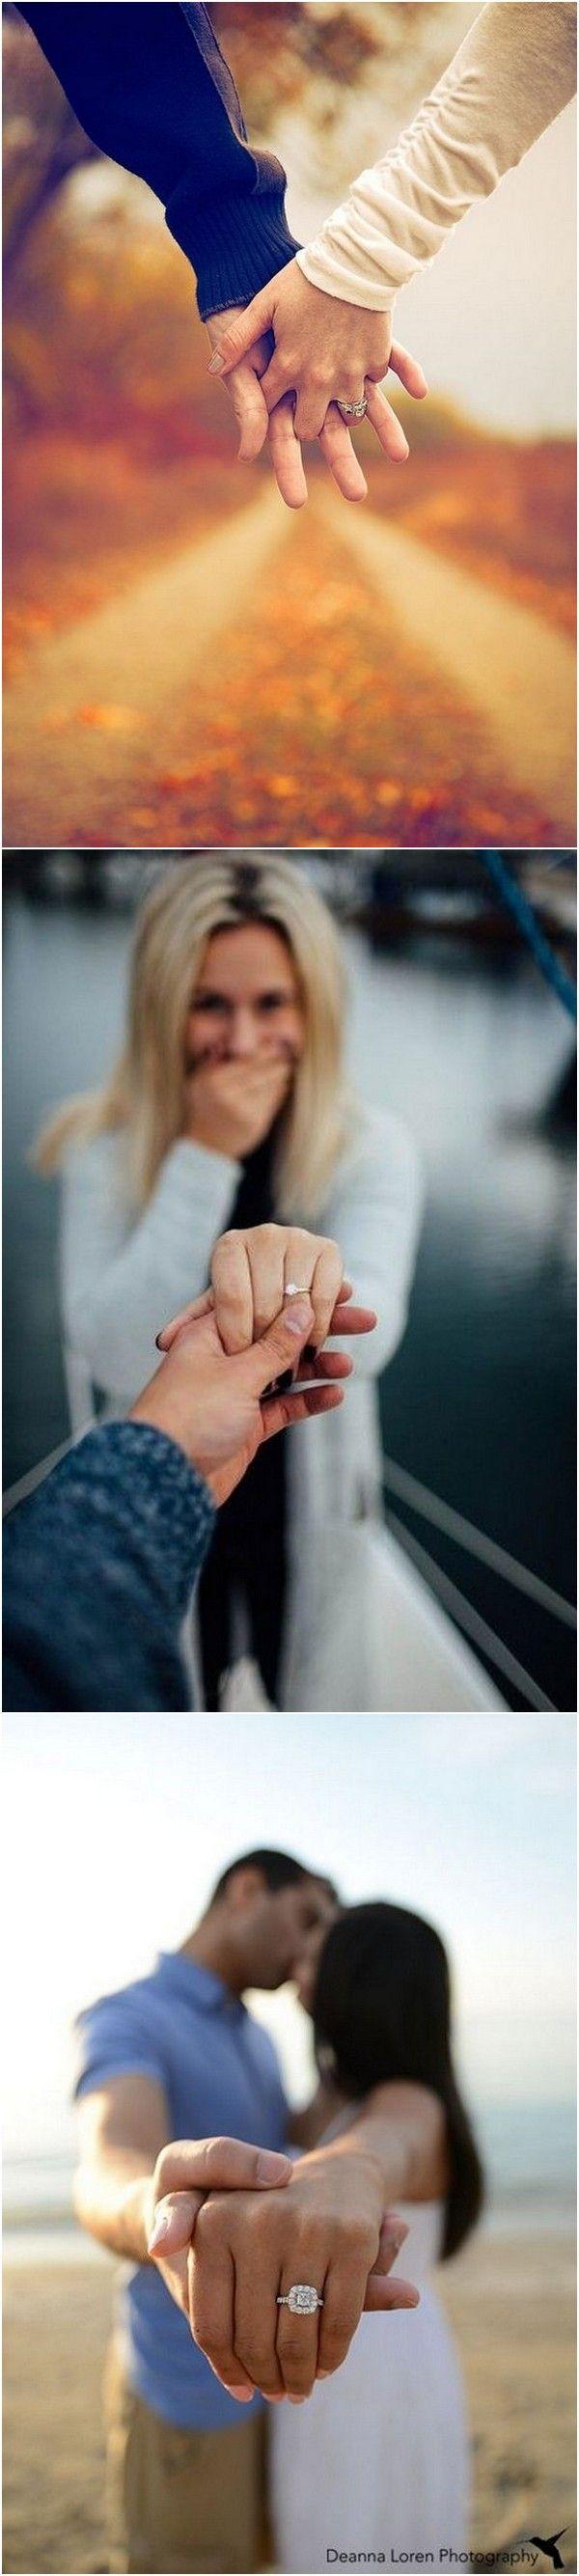 Wedding - Top 20 Engagement Photo Ideas To Love - Page 2 Of 2